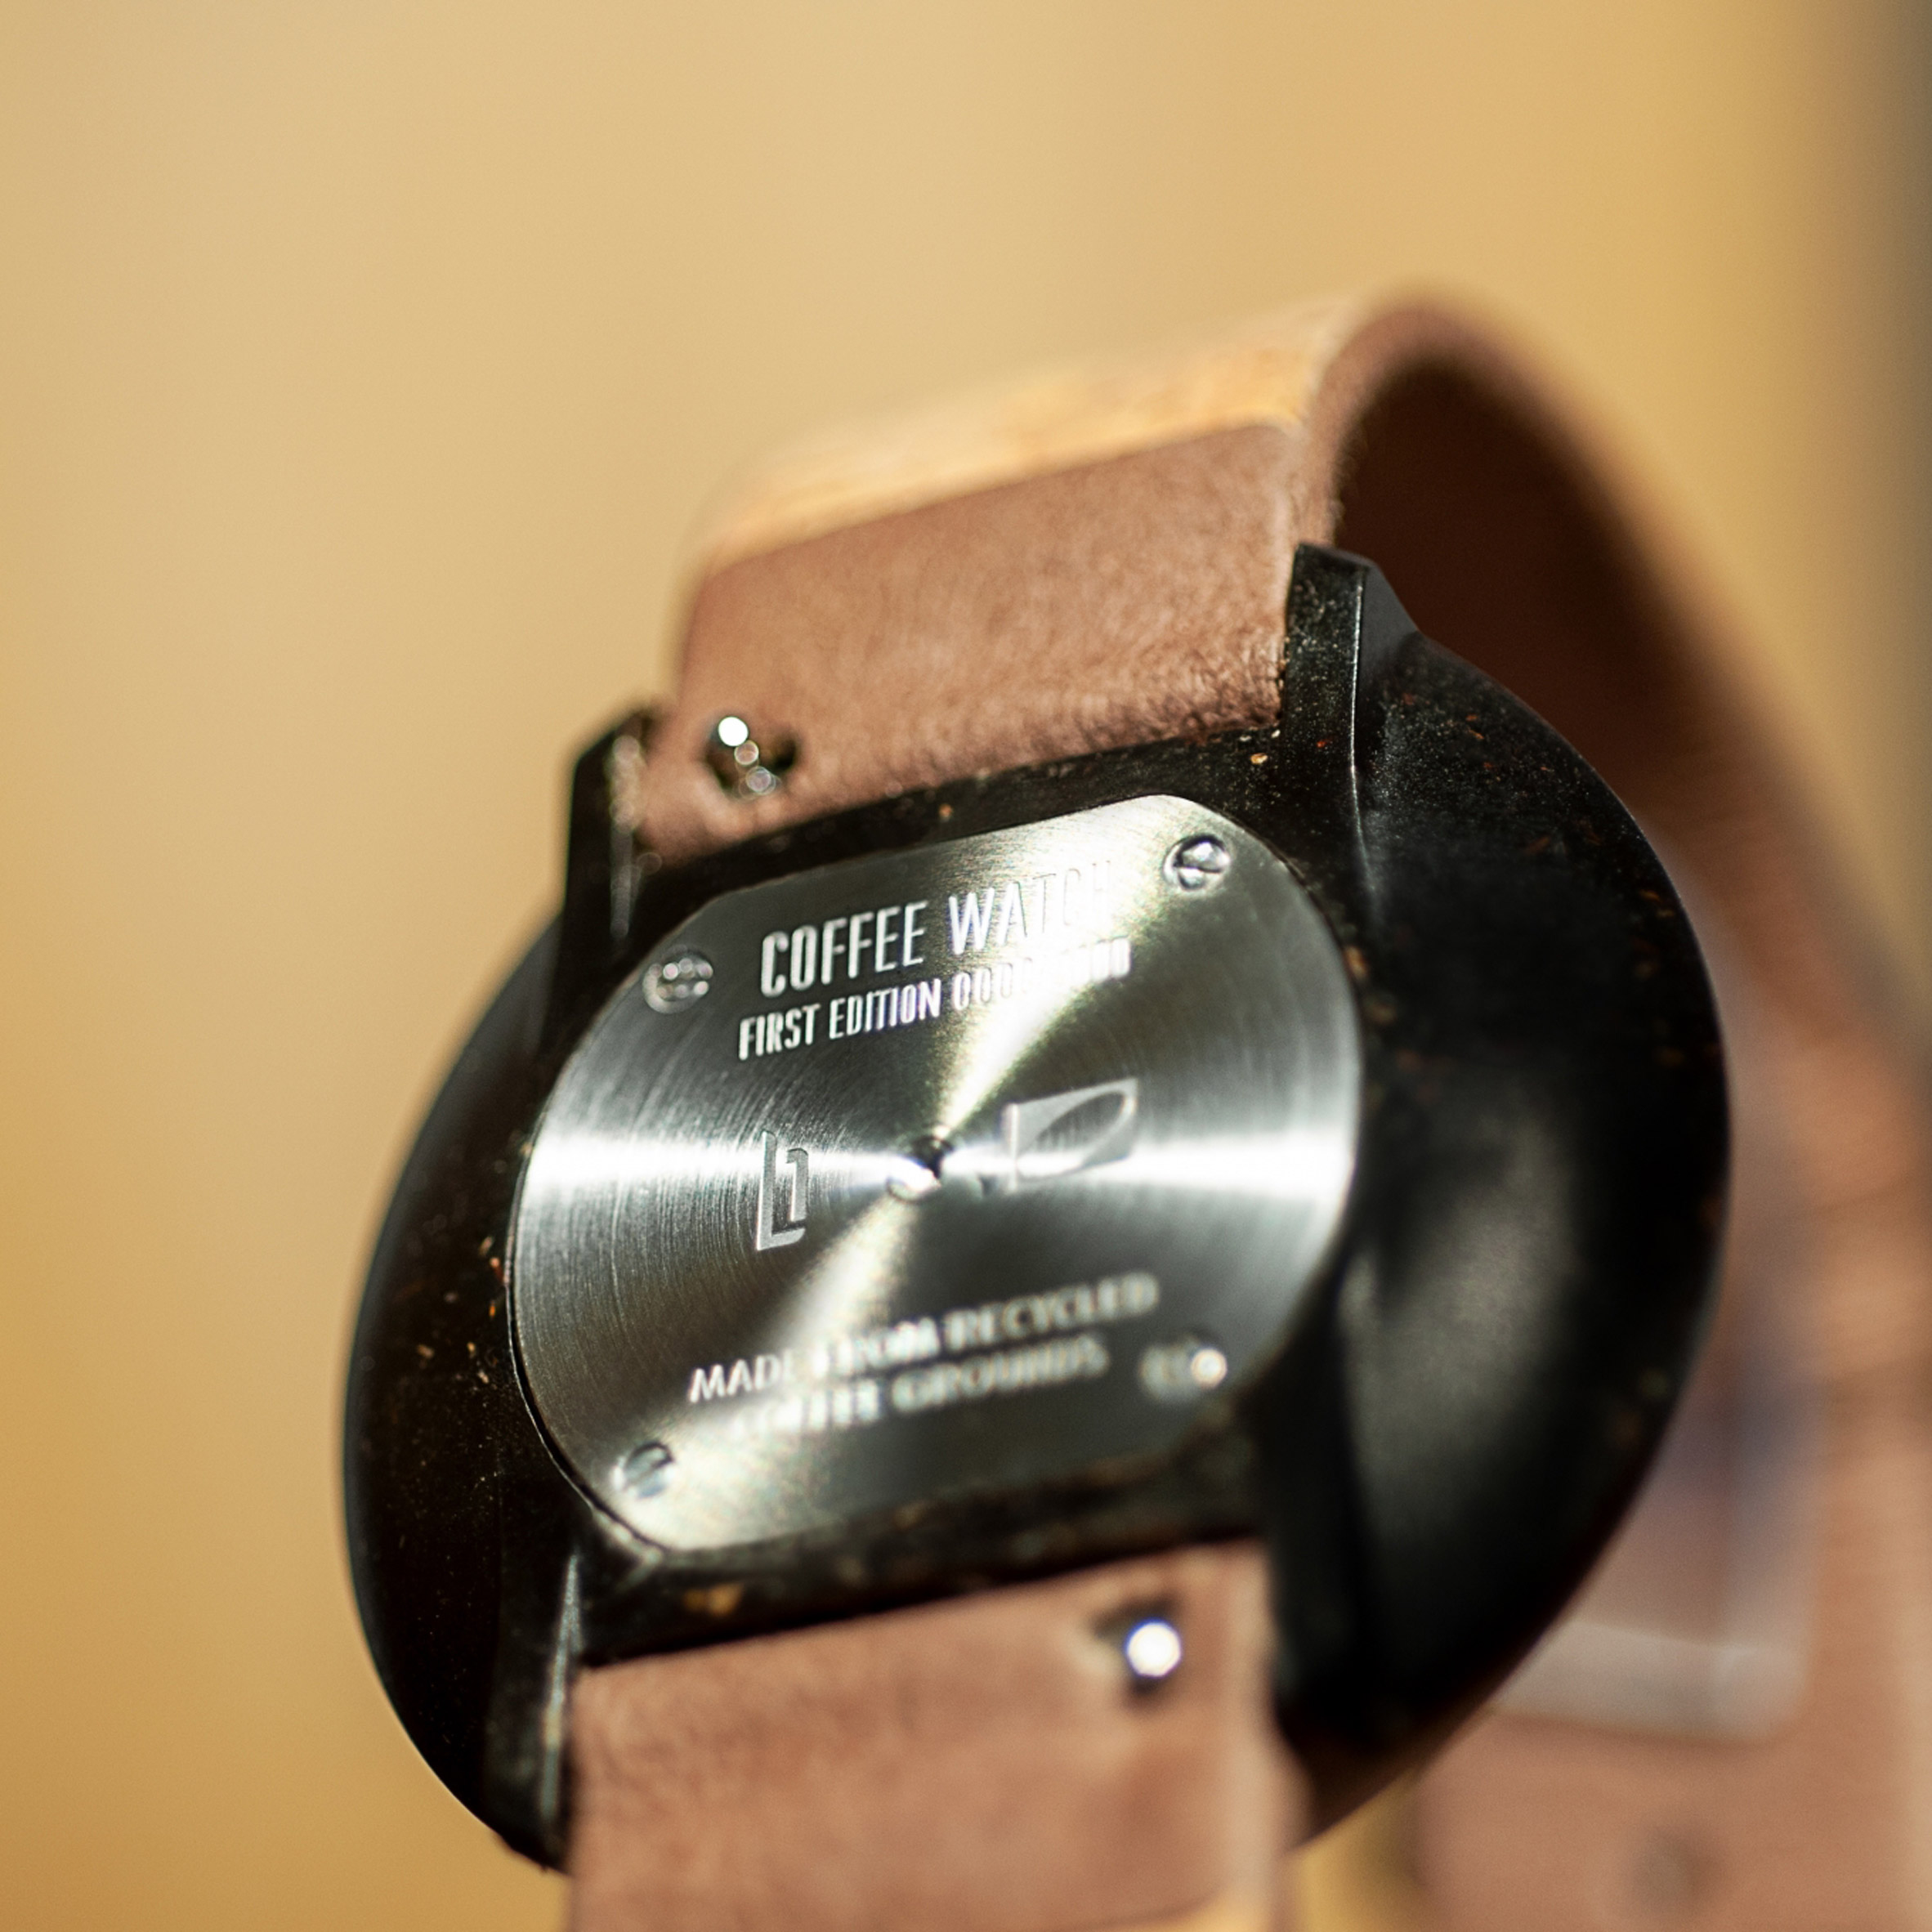 A close up photograph of Coffee Watch